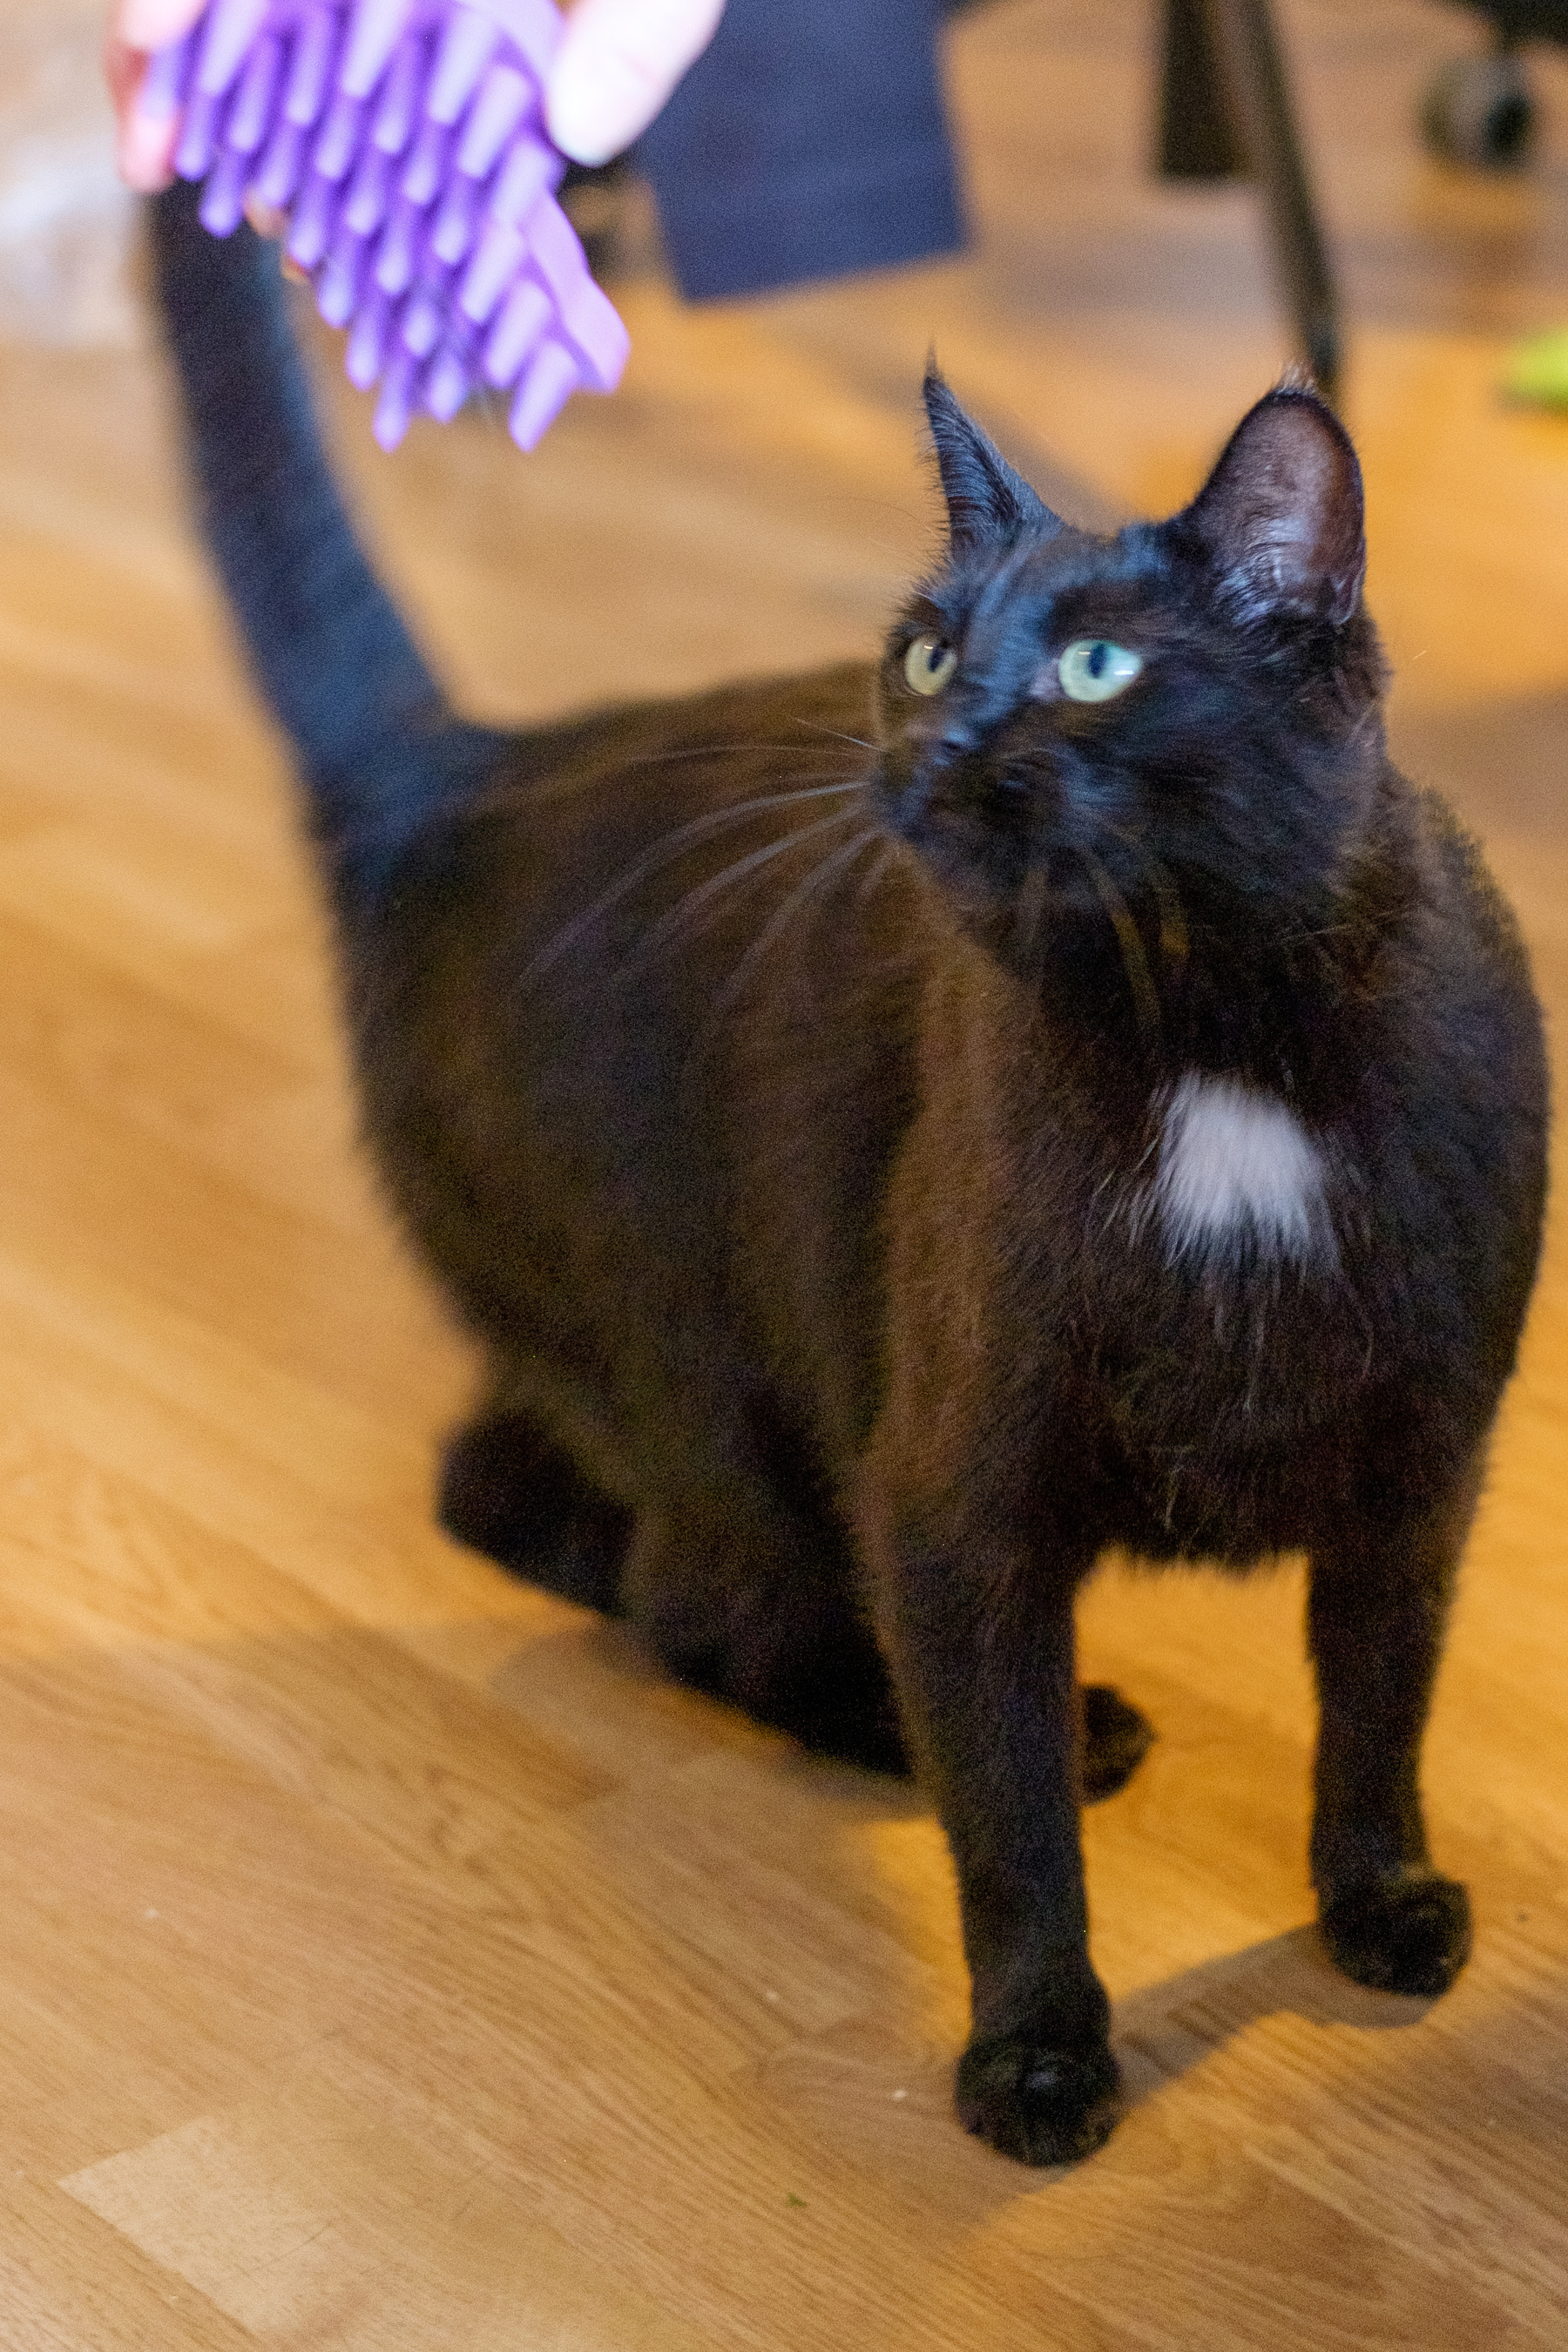 Kolka, a black cat with a white spot on her chest, turns around to look at something that interests her.